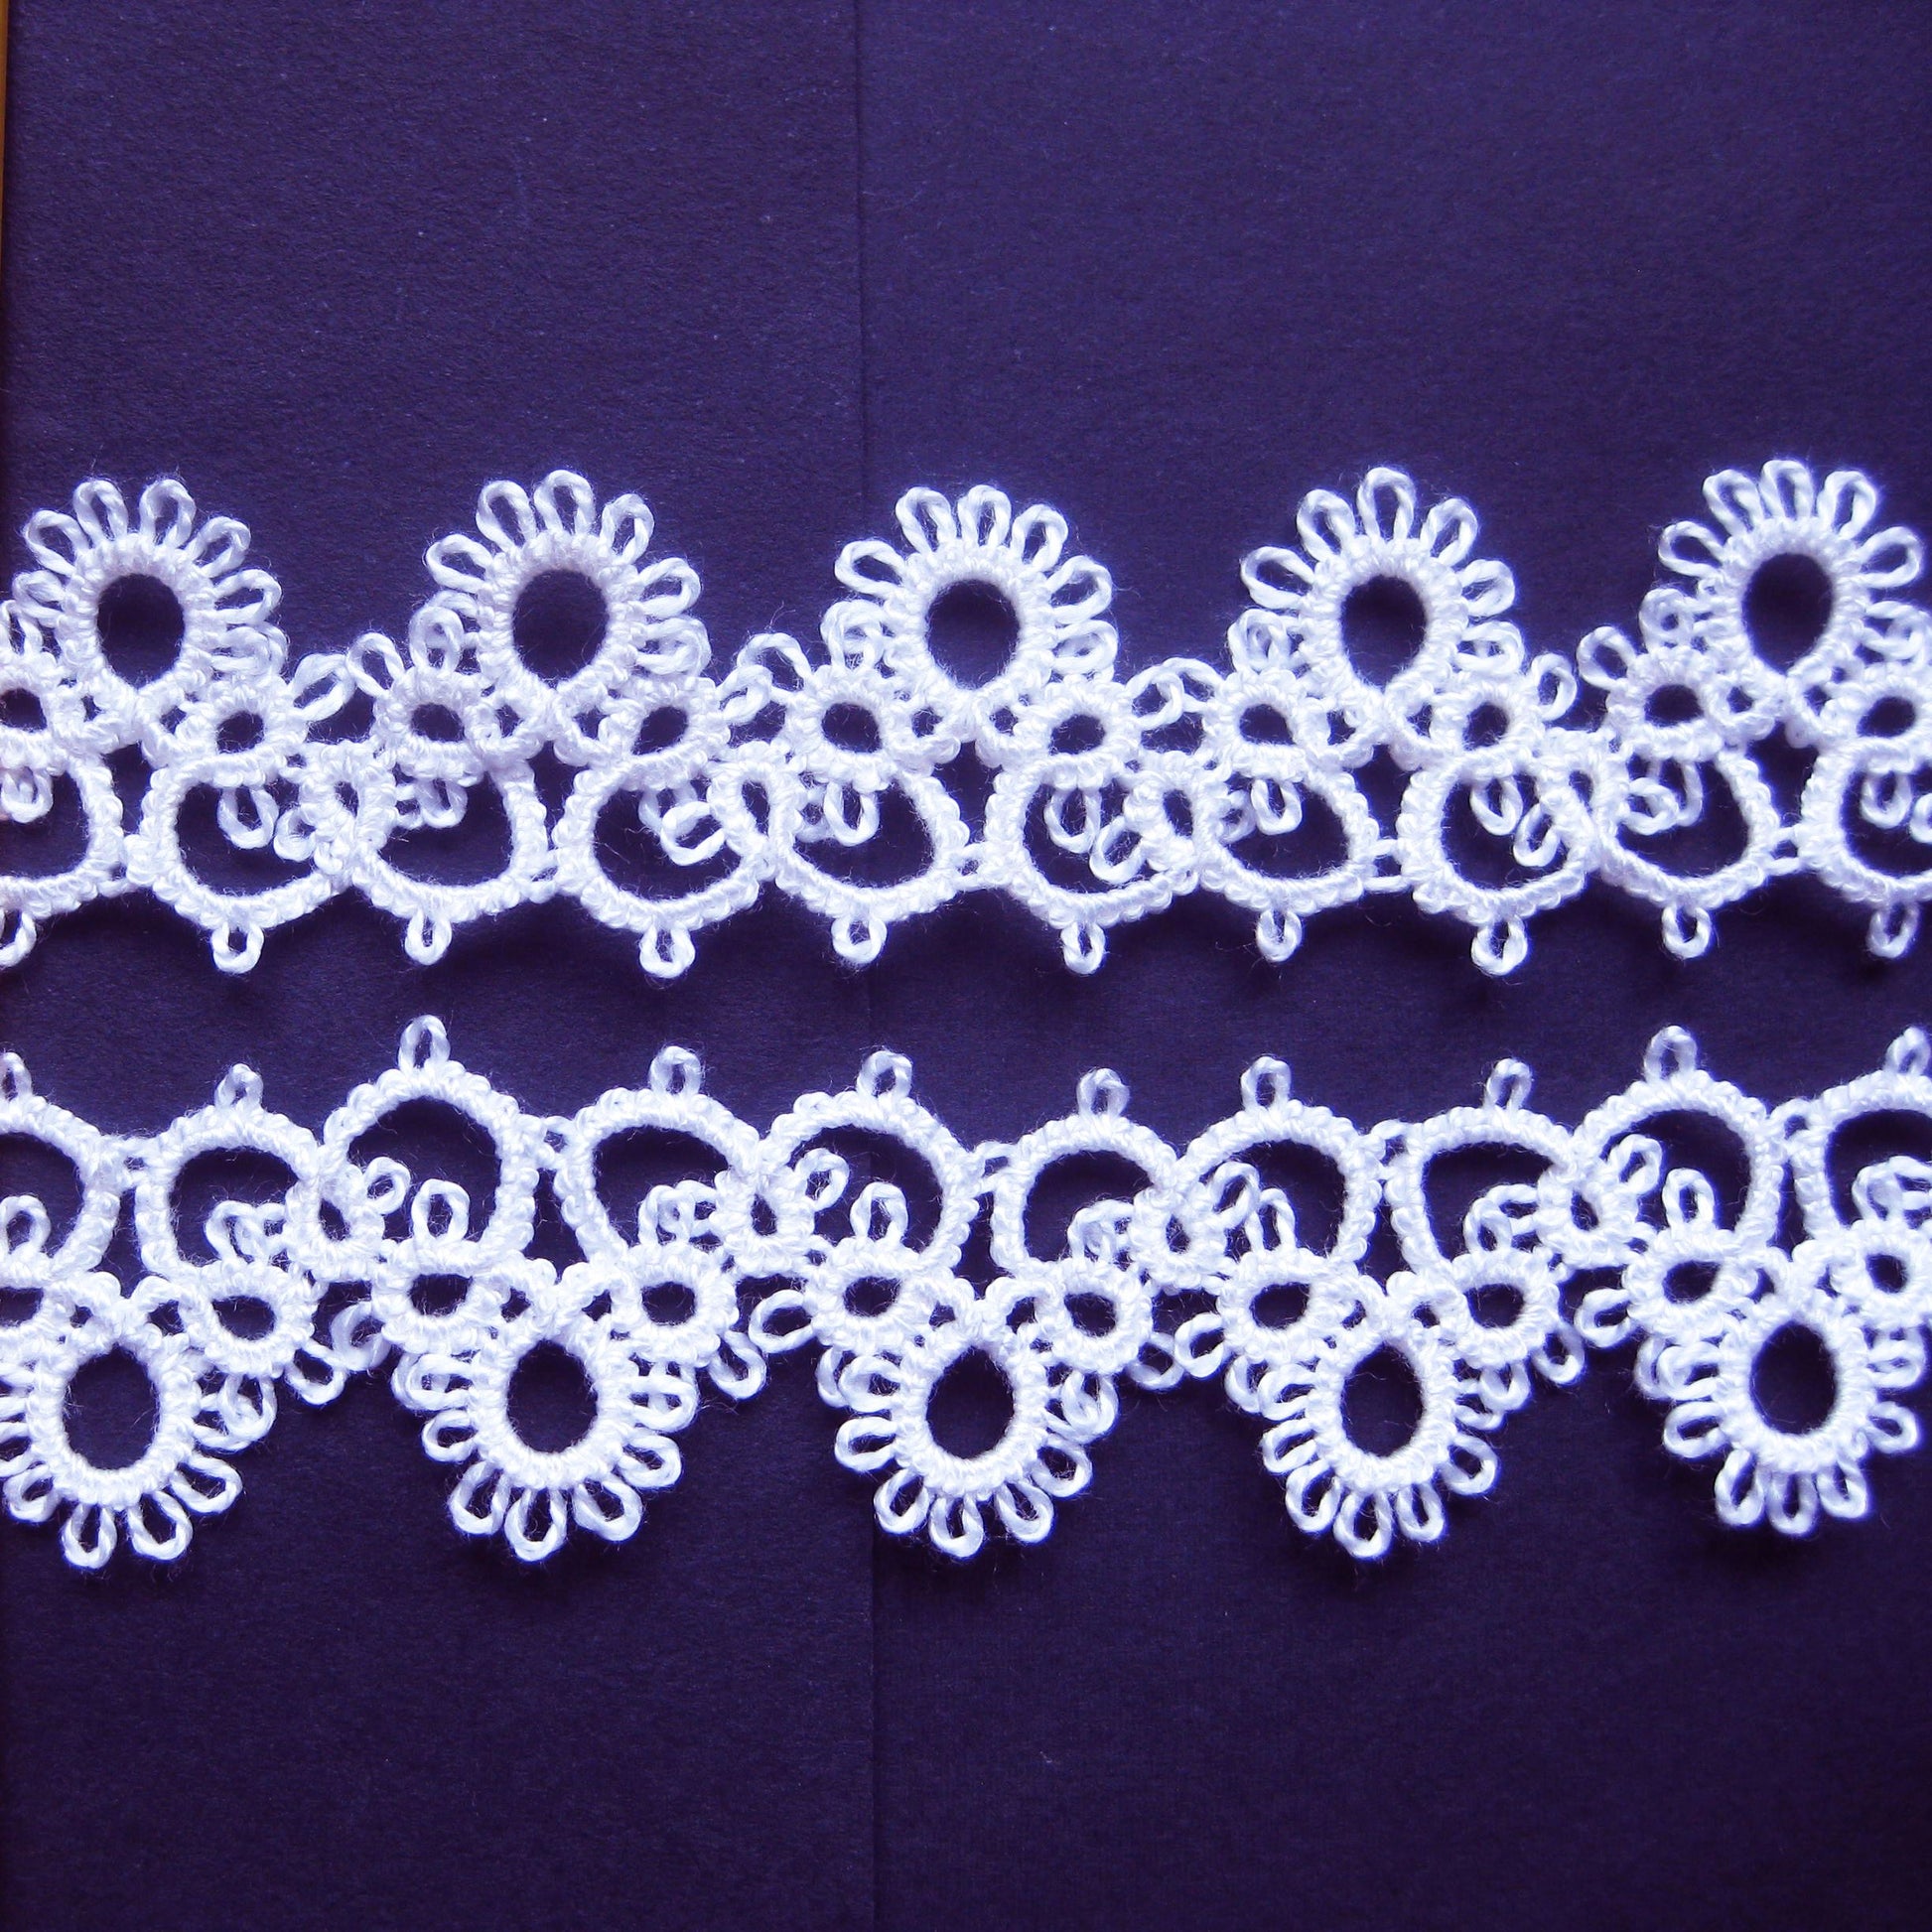 Lace Making - Needle Tatting - 2 hours private lesson